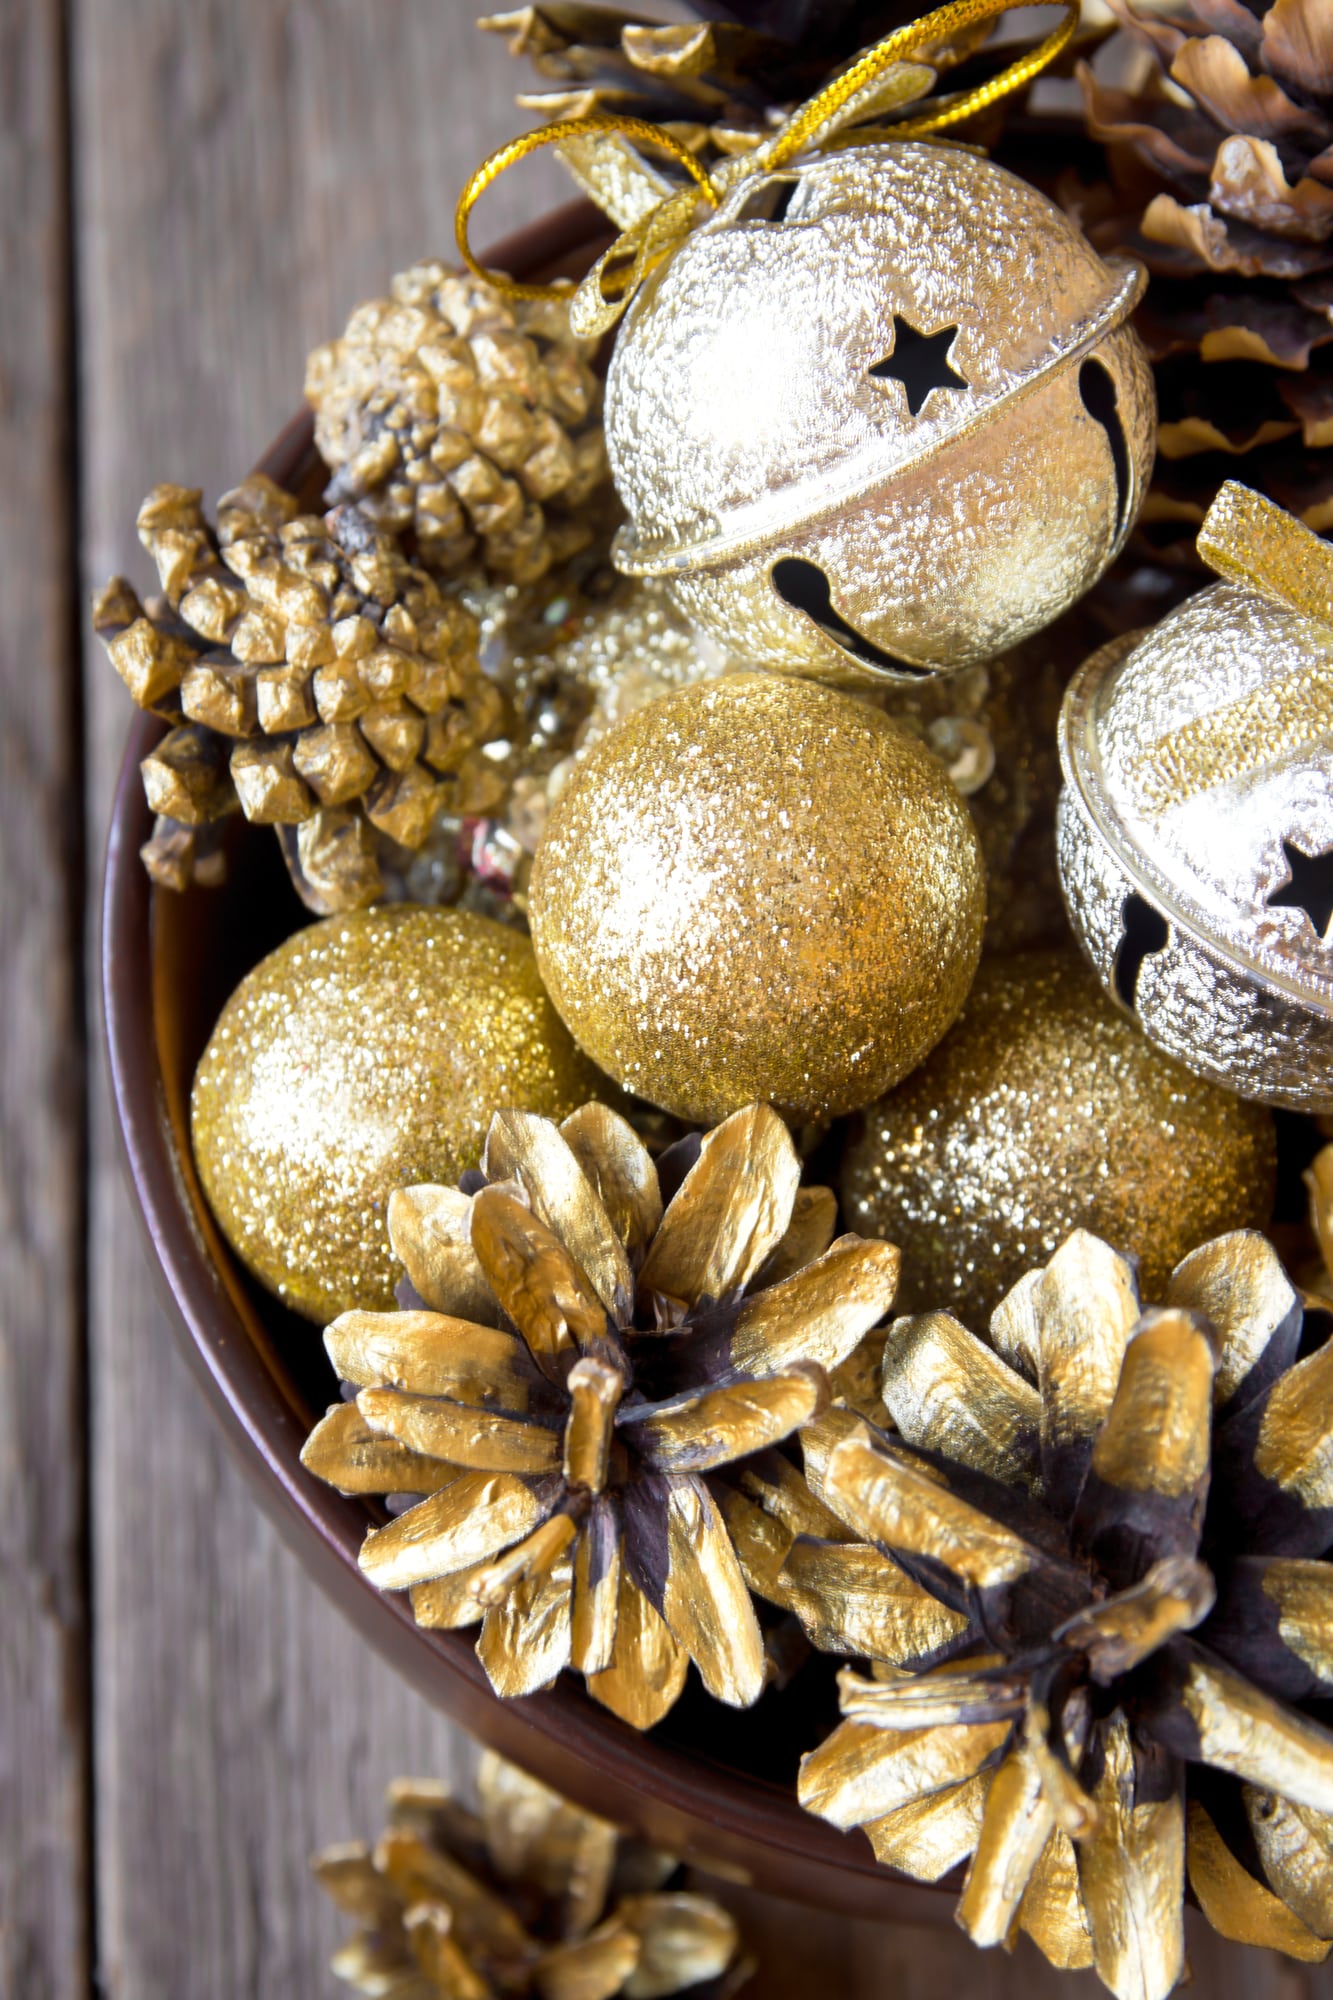 Christmas decorations in a bowl on a wooden table.